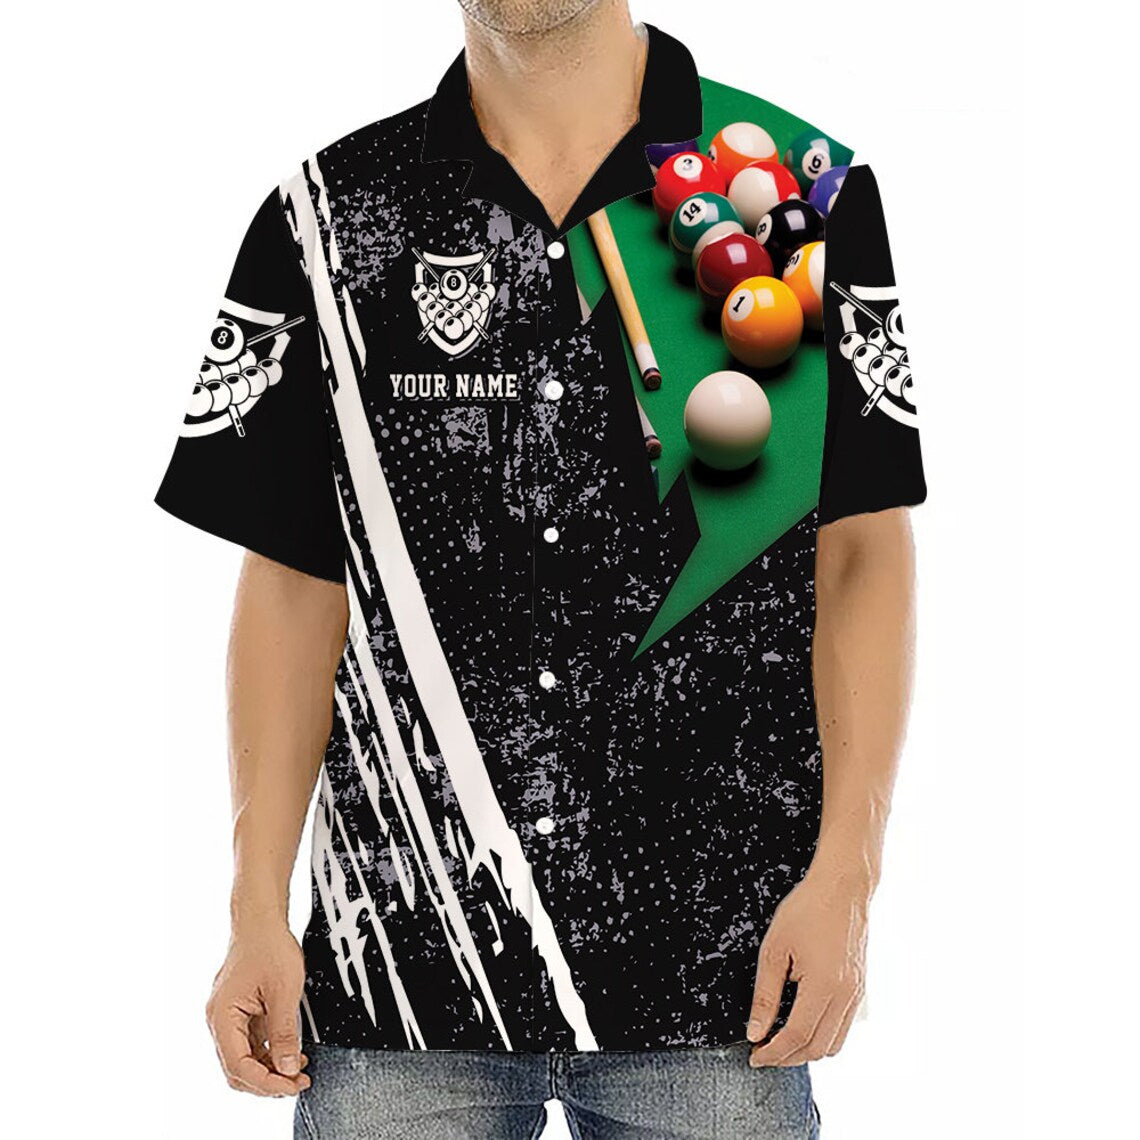 Personalized Billiards Team Hawaiian Shirt/ Gifts For Bachelor Party/ Best Gifts for Men/ Pool Player Hawaii Shirt/ Gift For Billiard Lovers